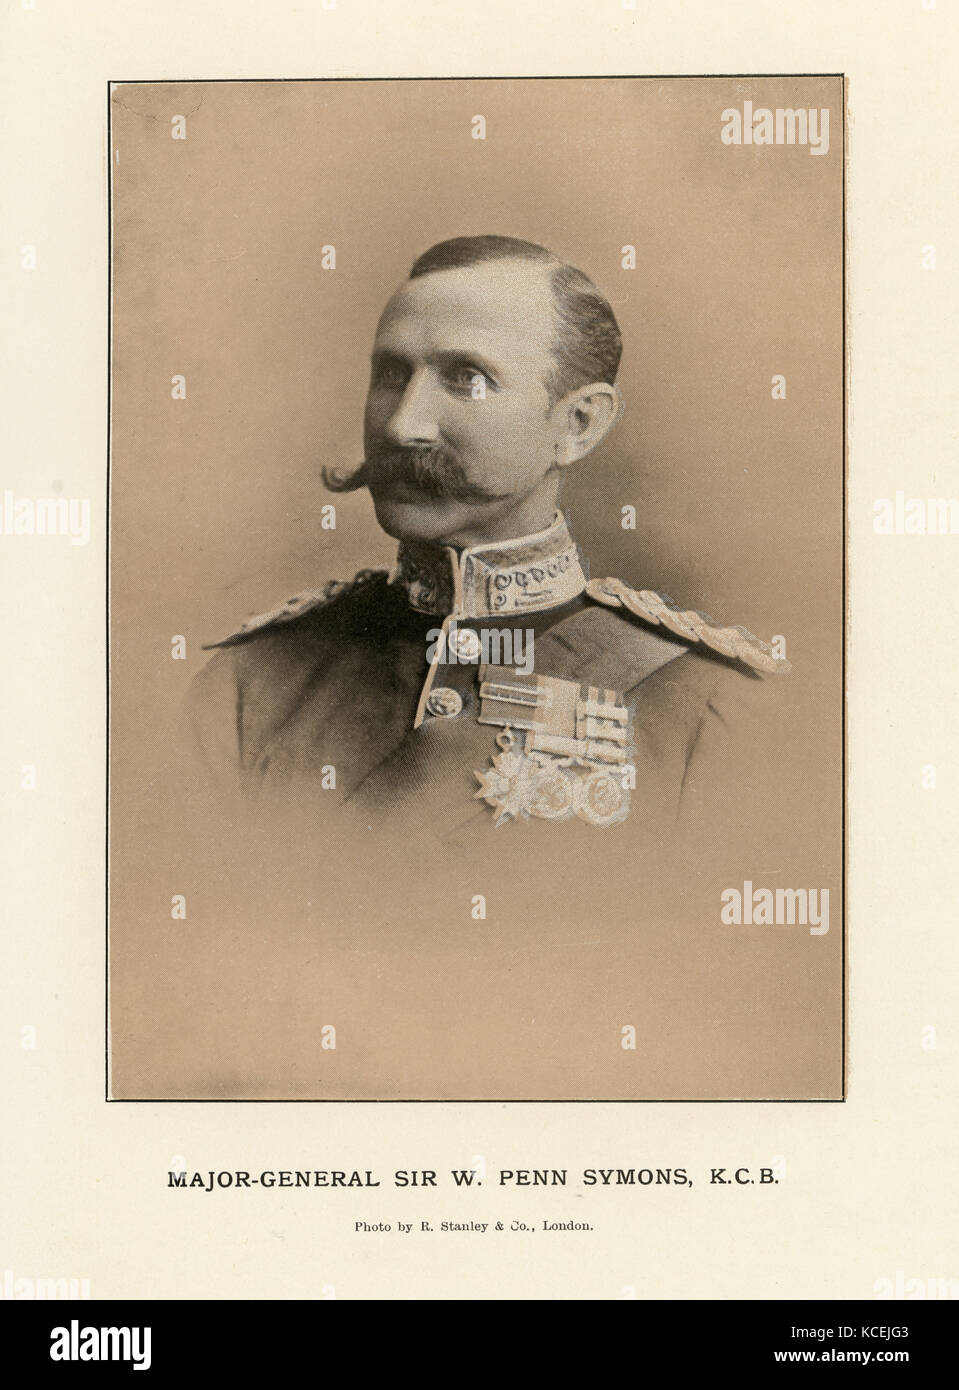 Major General Sir William Penn Symons, a British Army officer who was mortally wounded as he commanded his forces at the Battle of Talana Hill during the Second Boer War. Stock Photo